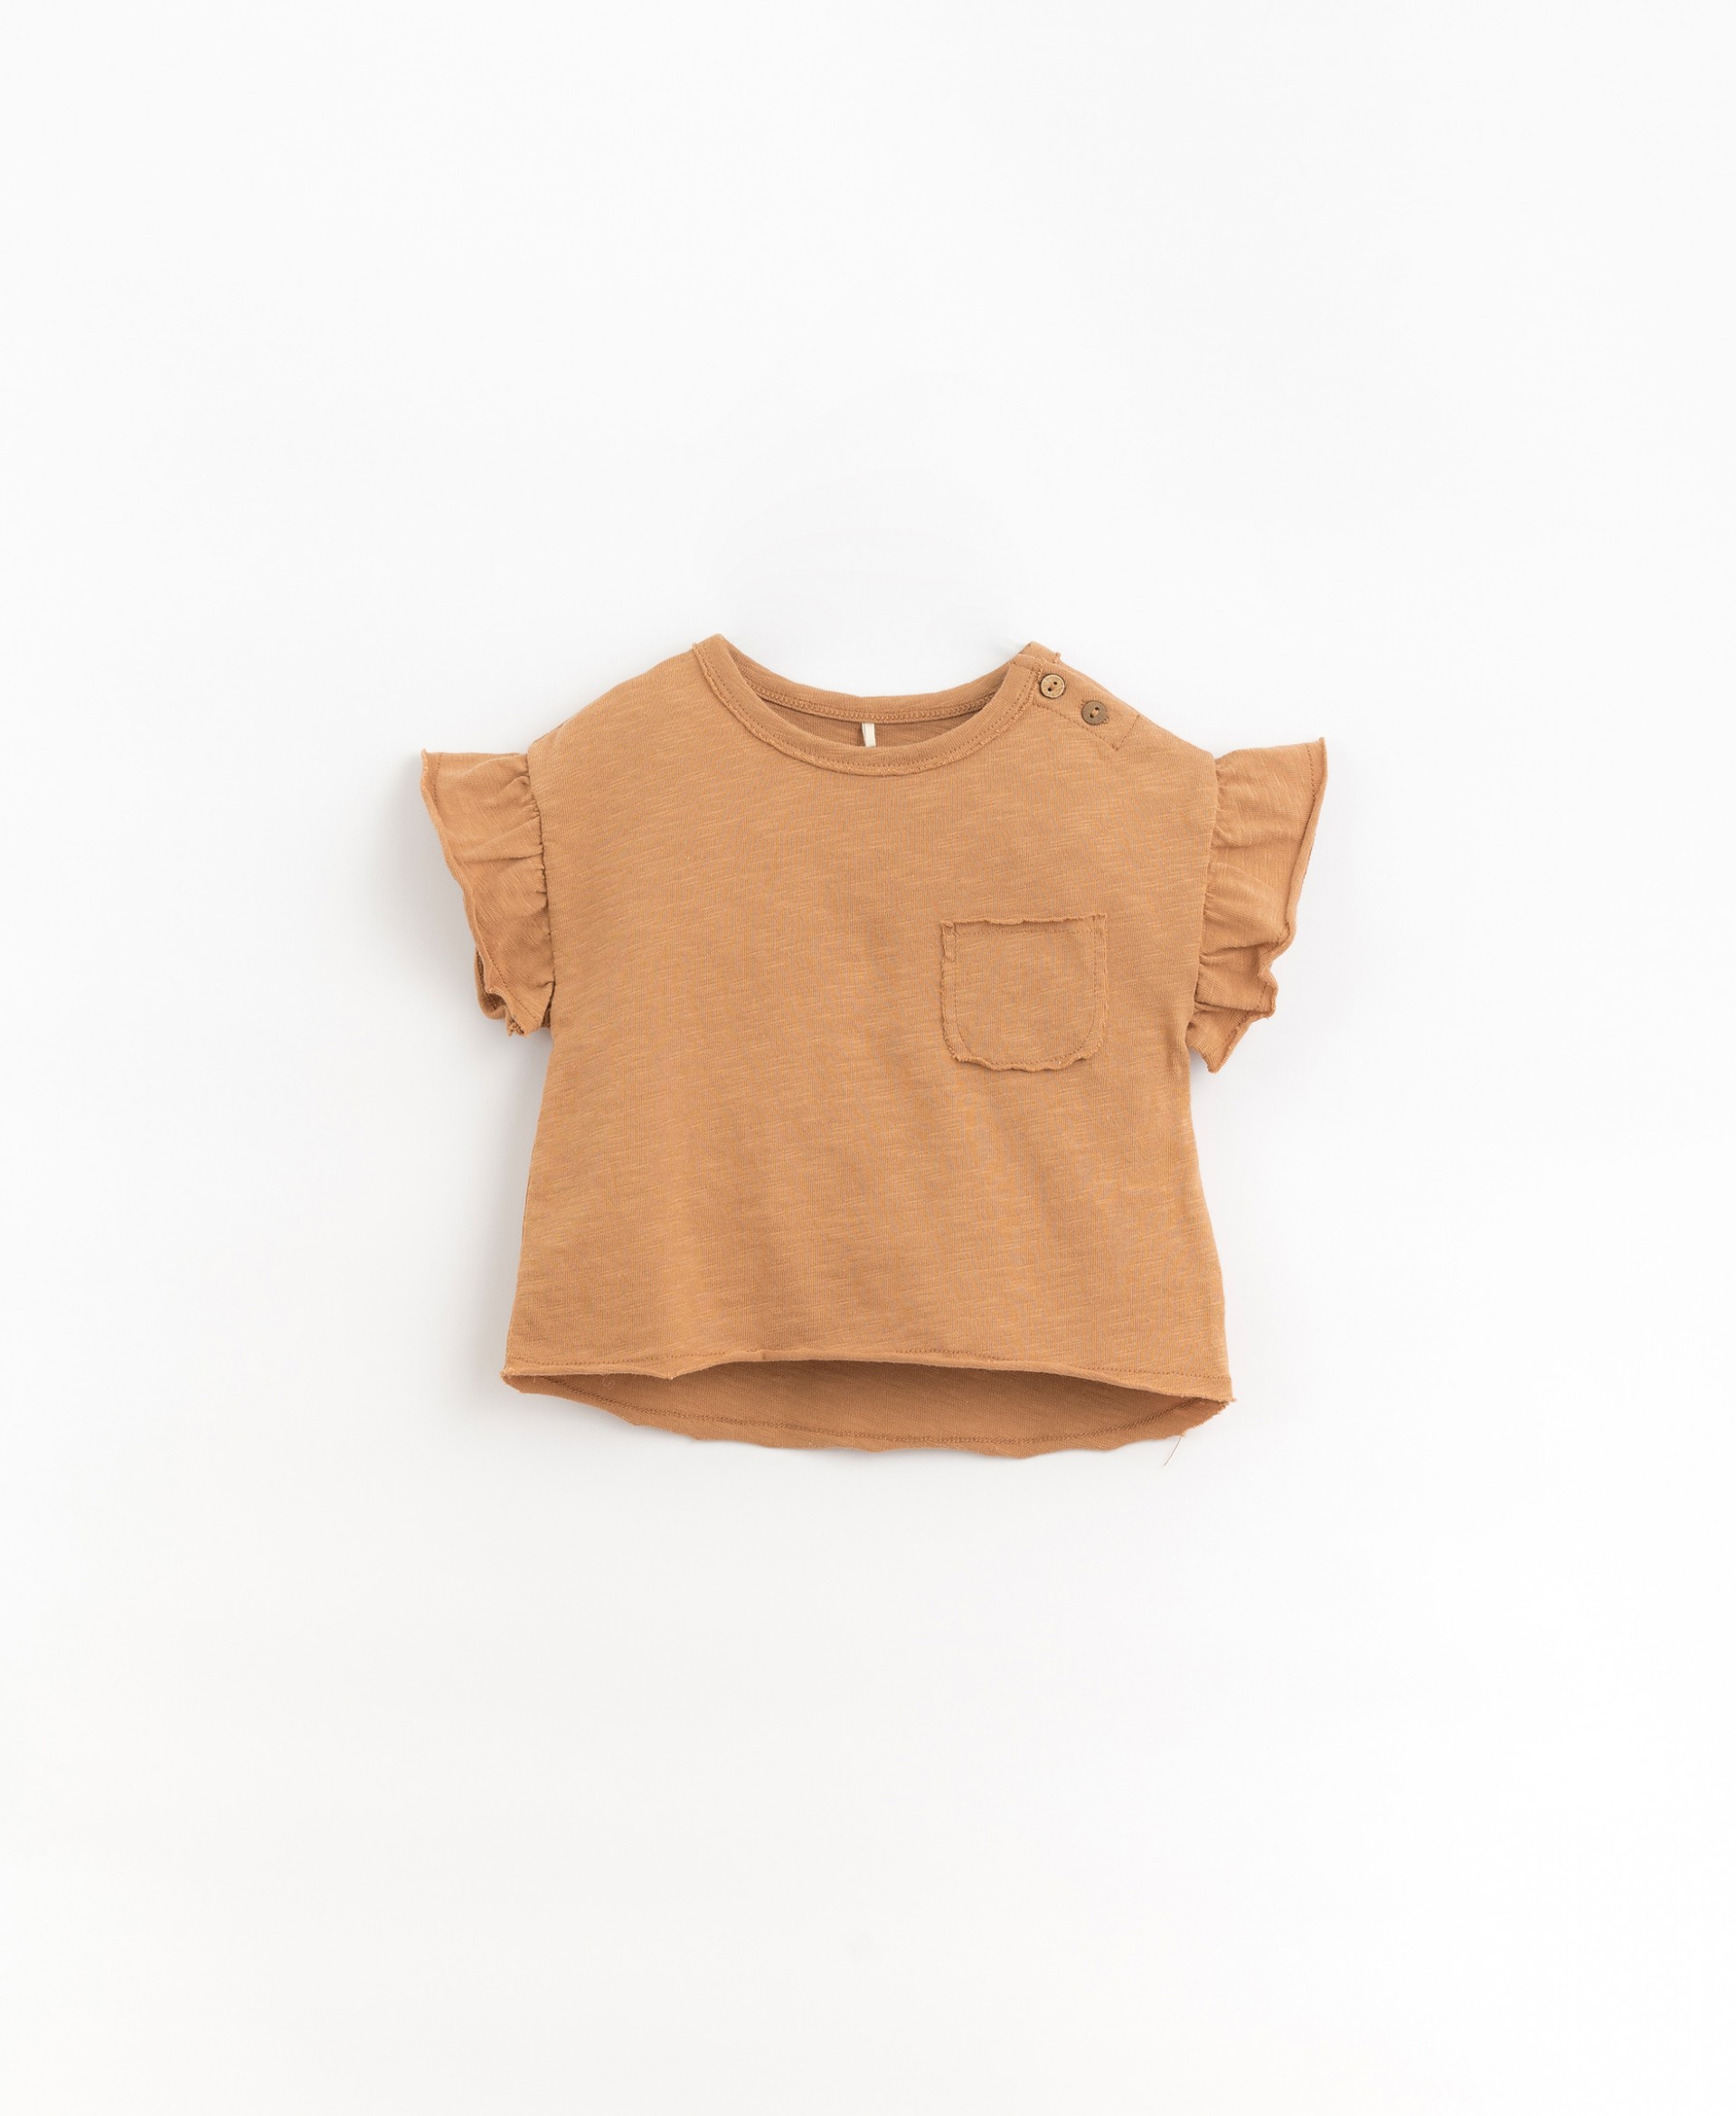 T-shirt in organic cotton with a front pocket | Organic Care